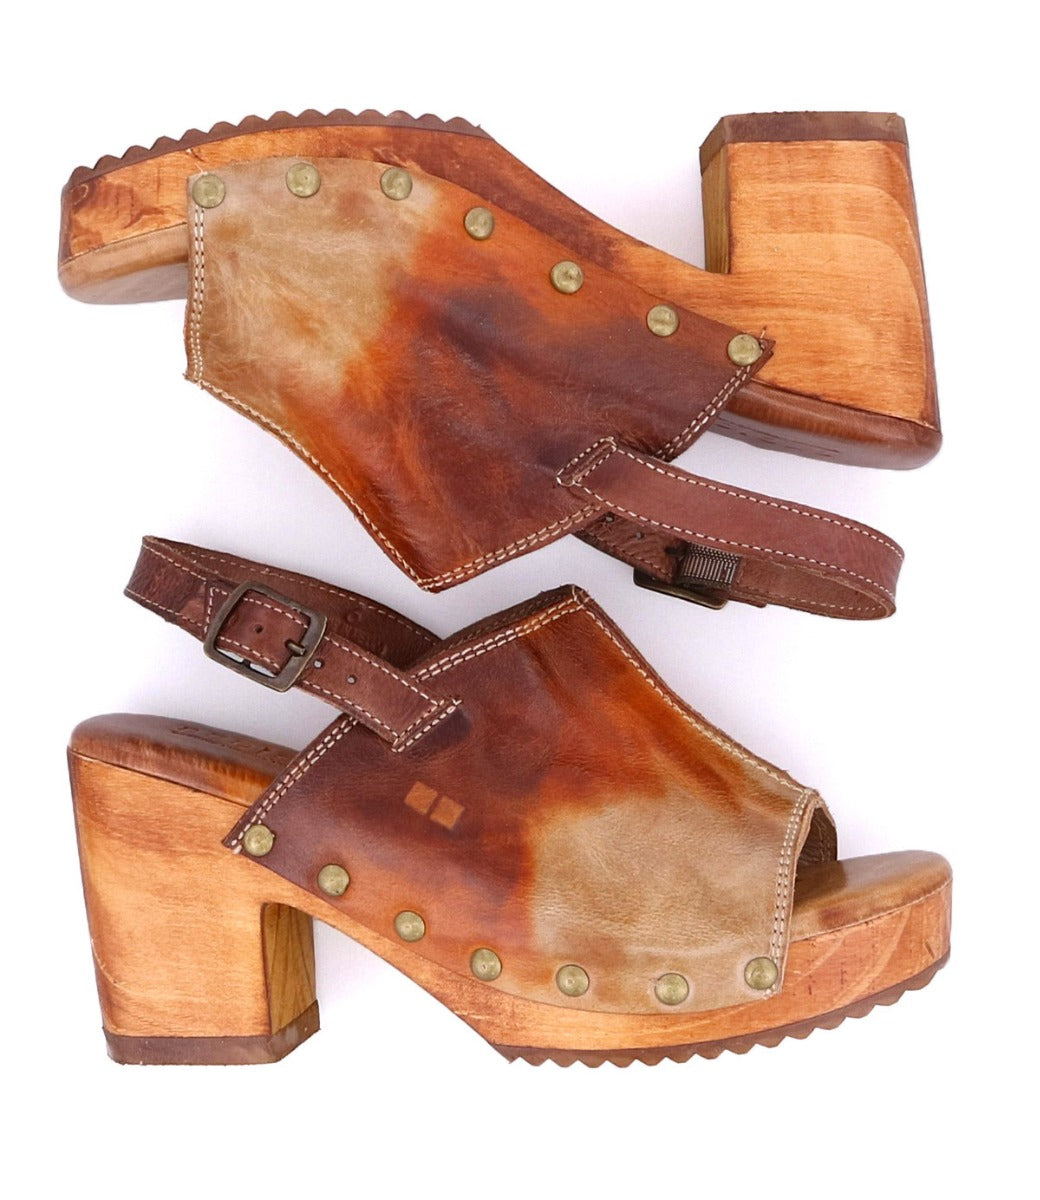 A pair of Marie brown leather sandals with a wooden heel from Bed Stu.